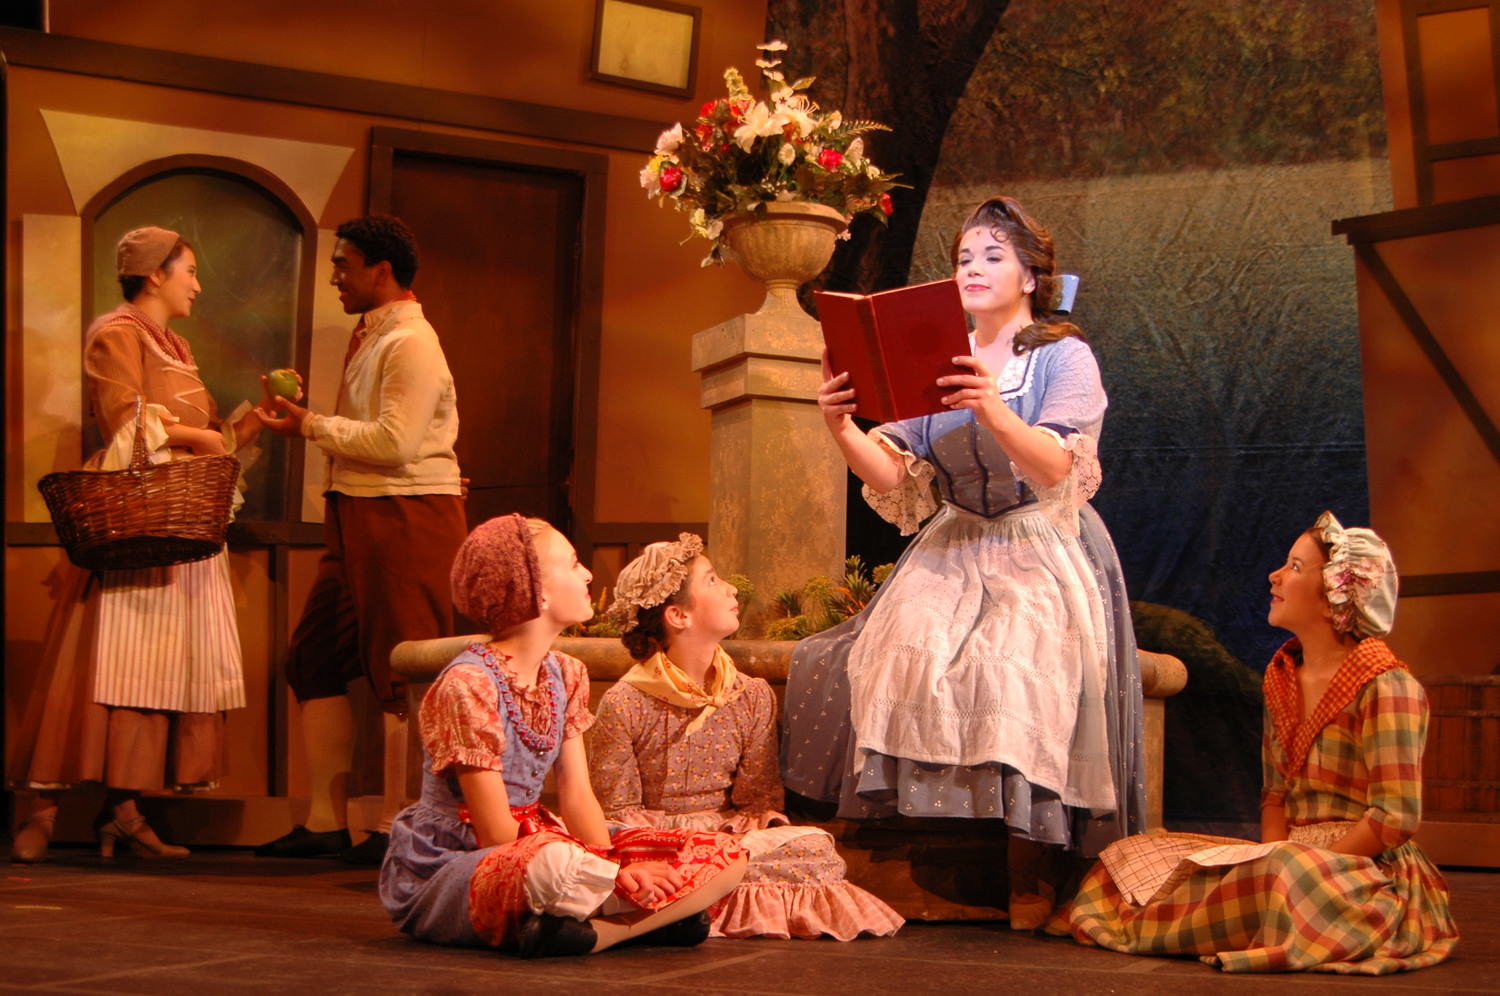 Belle reading a book in Act 1 performing 